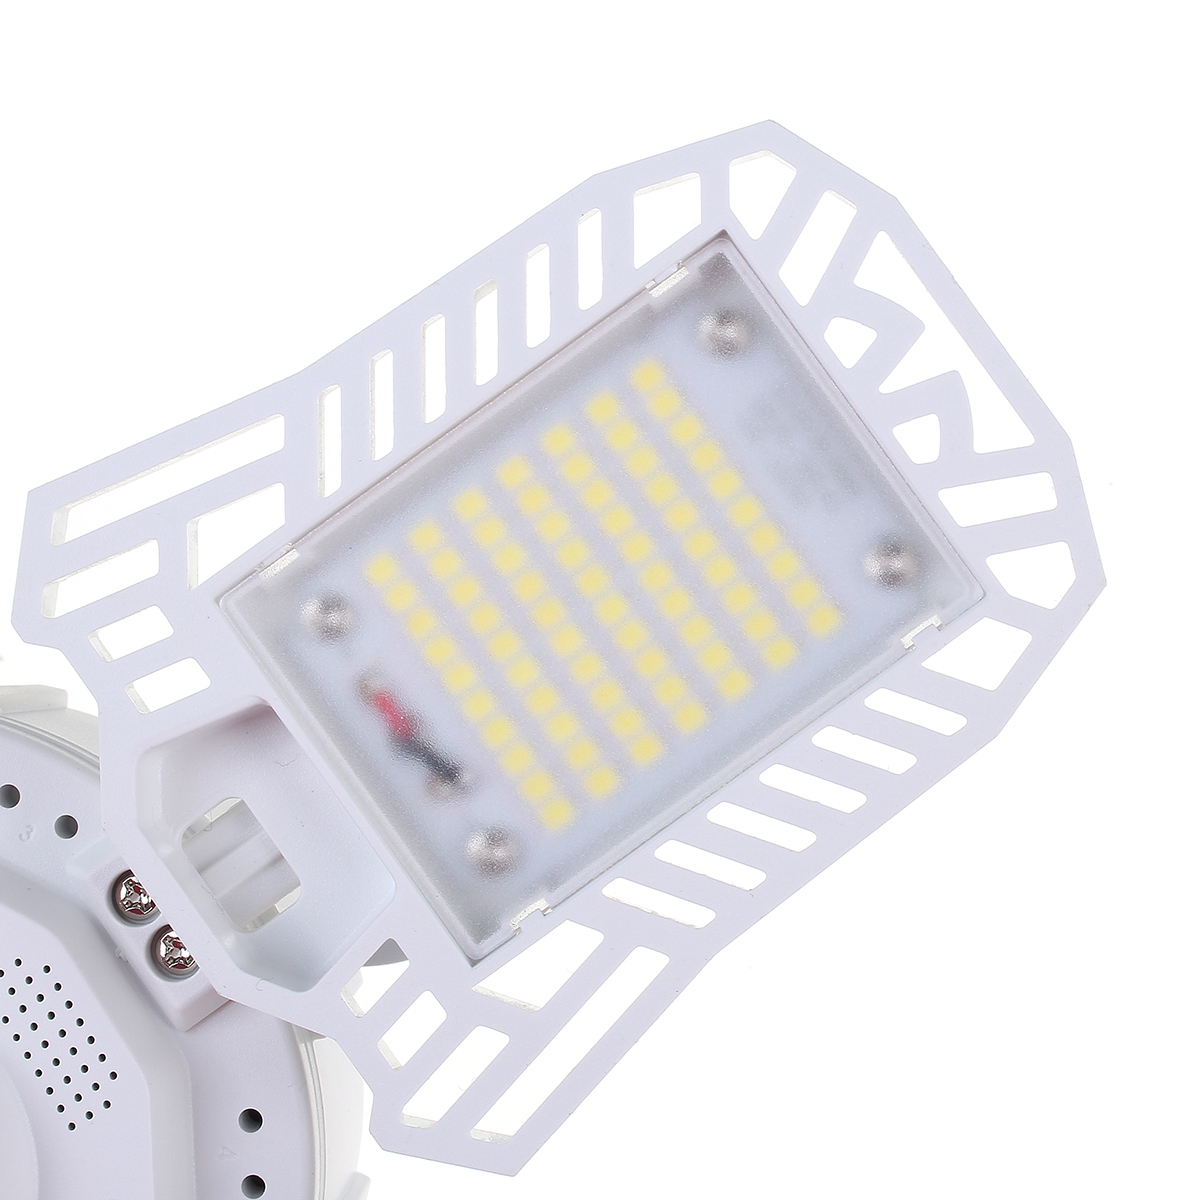 6080100W-Upgrade-Version-Deformable-Ultra-bright-LED-Garage-Ceiling-Light-with-5-Adjustable-Panels-f-1807164-13